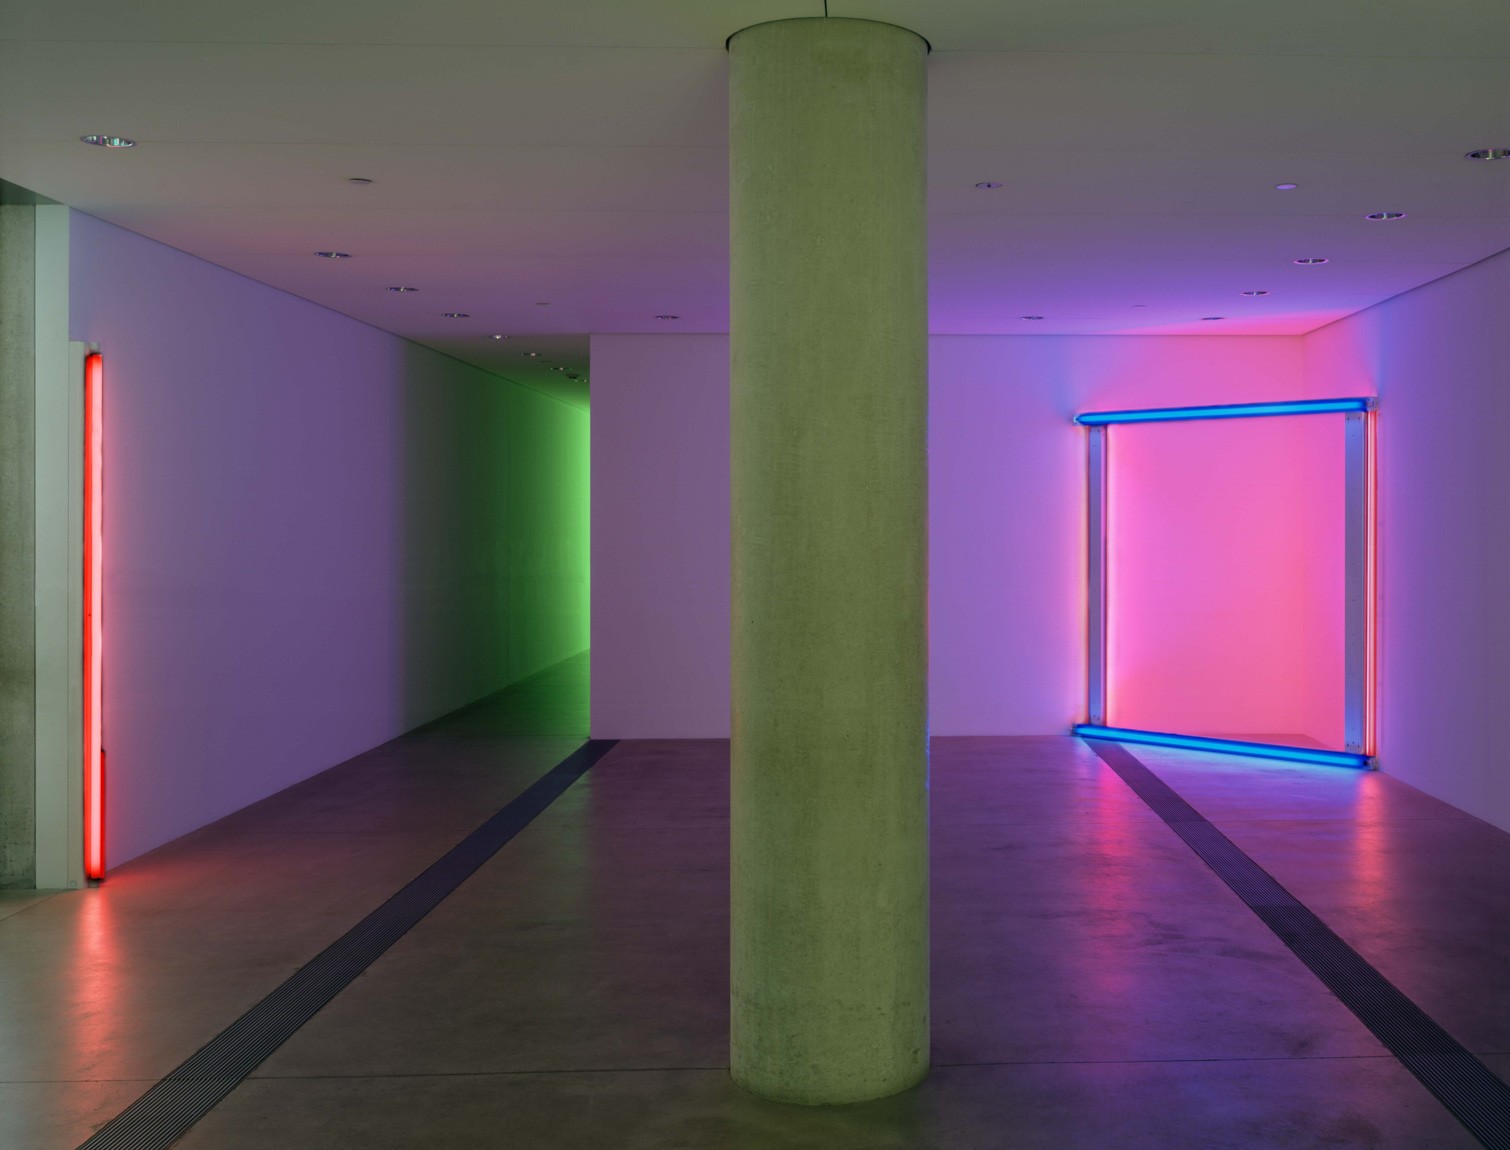 Flavin's bright purple and blue piece "untitled (to the 'innovator' of Wheeling Peachblow)" is installed in the southwest corner of the Entrance Gallery. His piece "untitled," a tall red beam and a shorter pink beam, stands against the eastern wall.